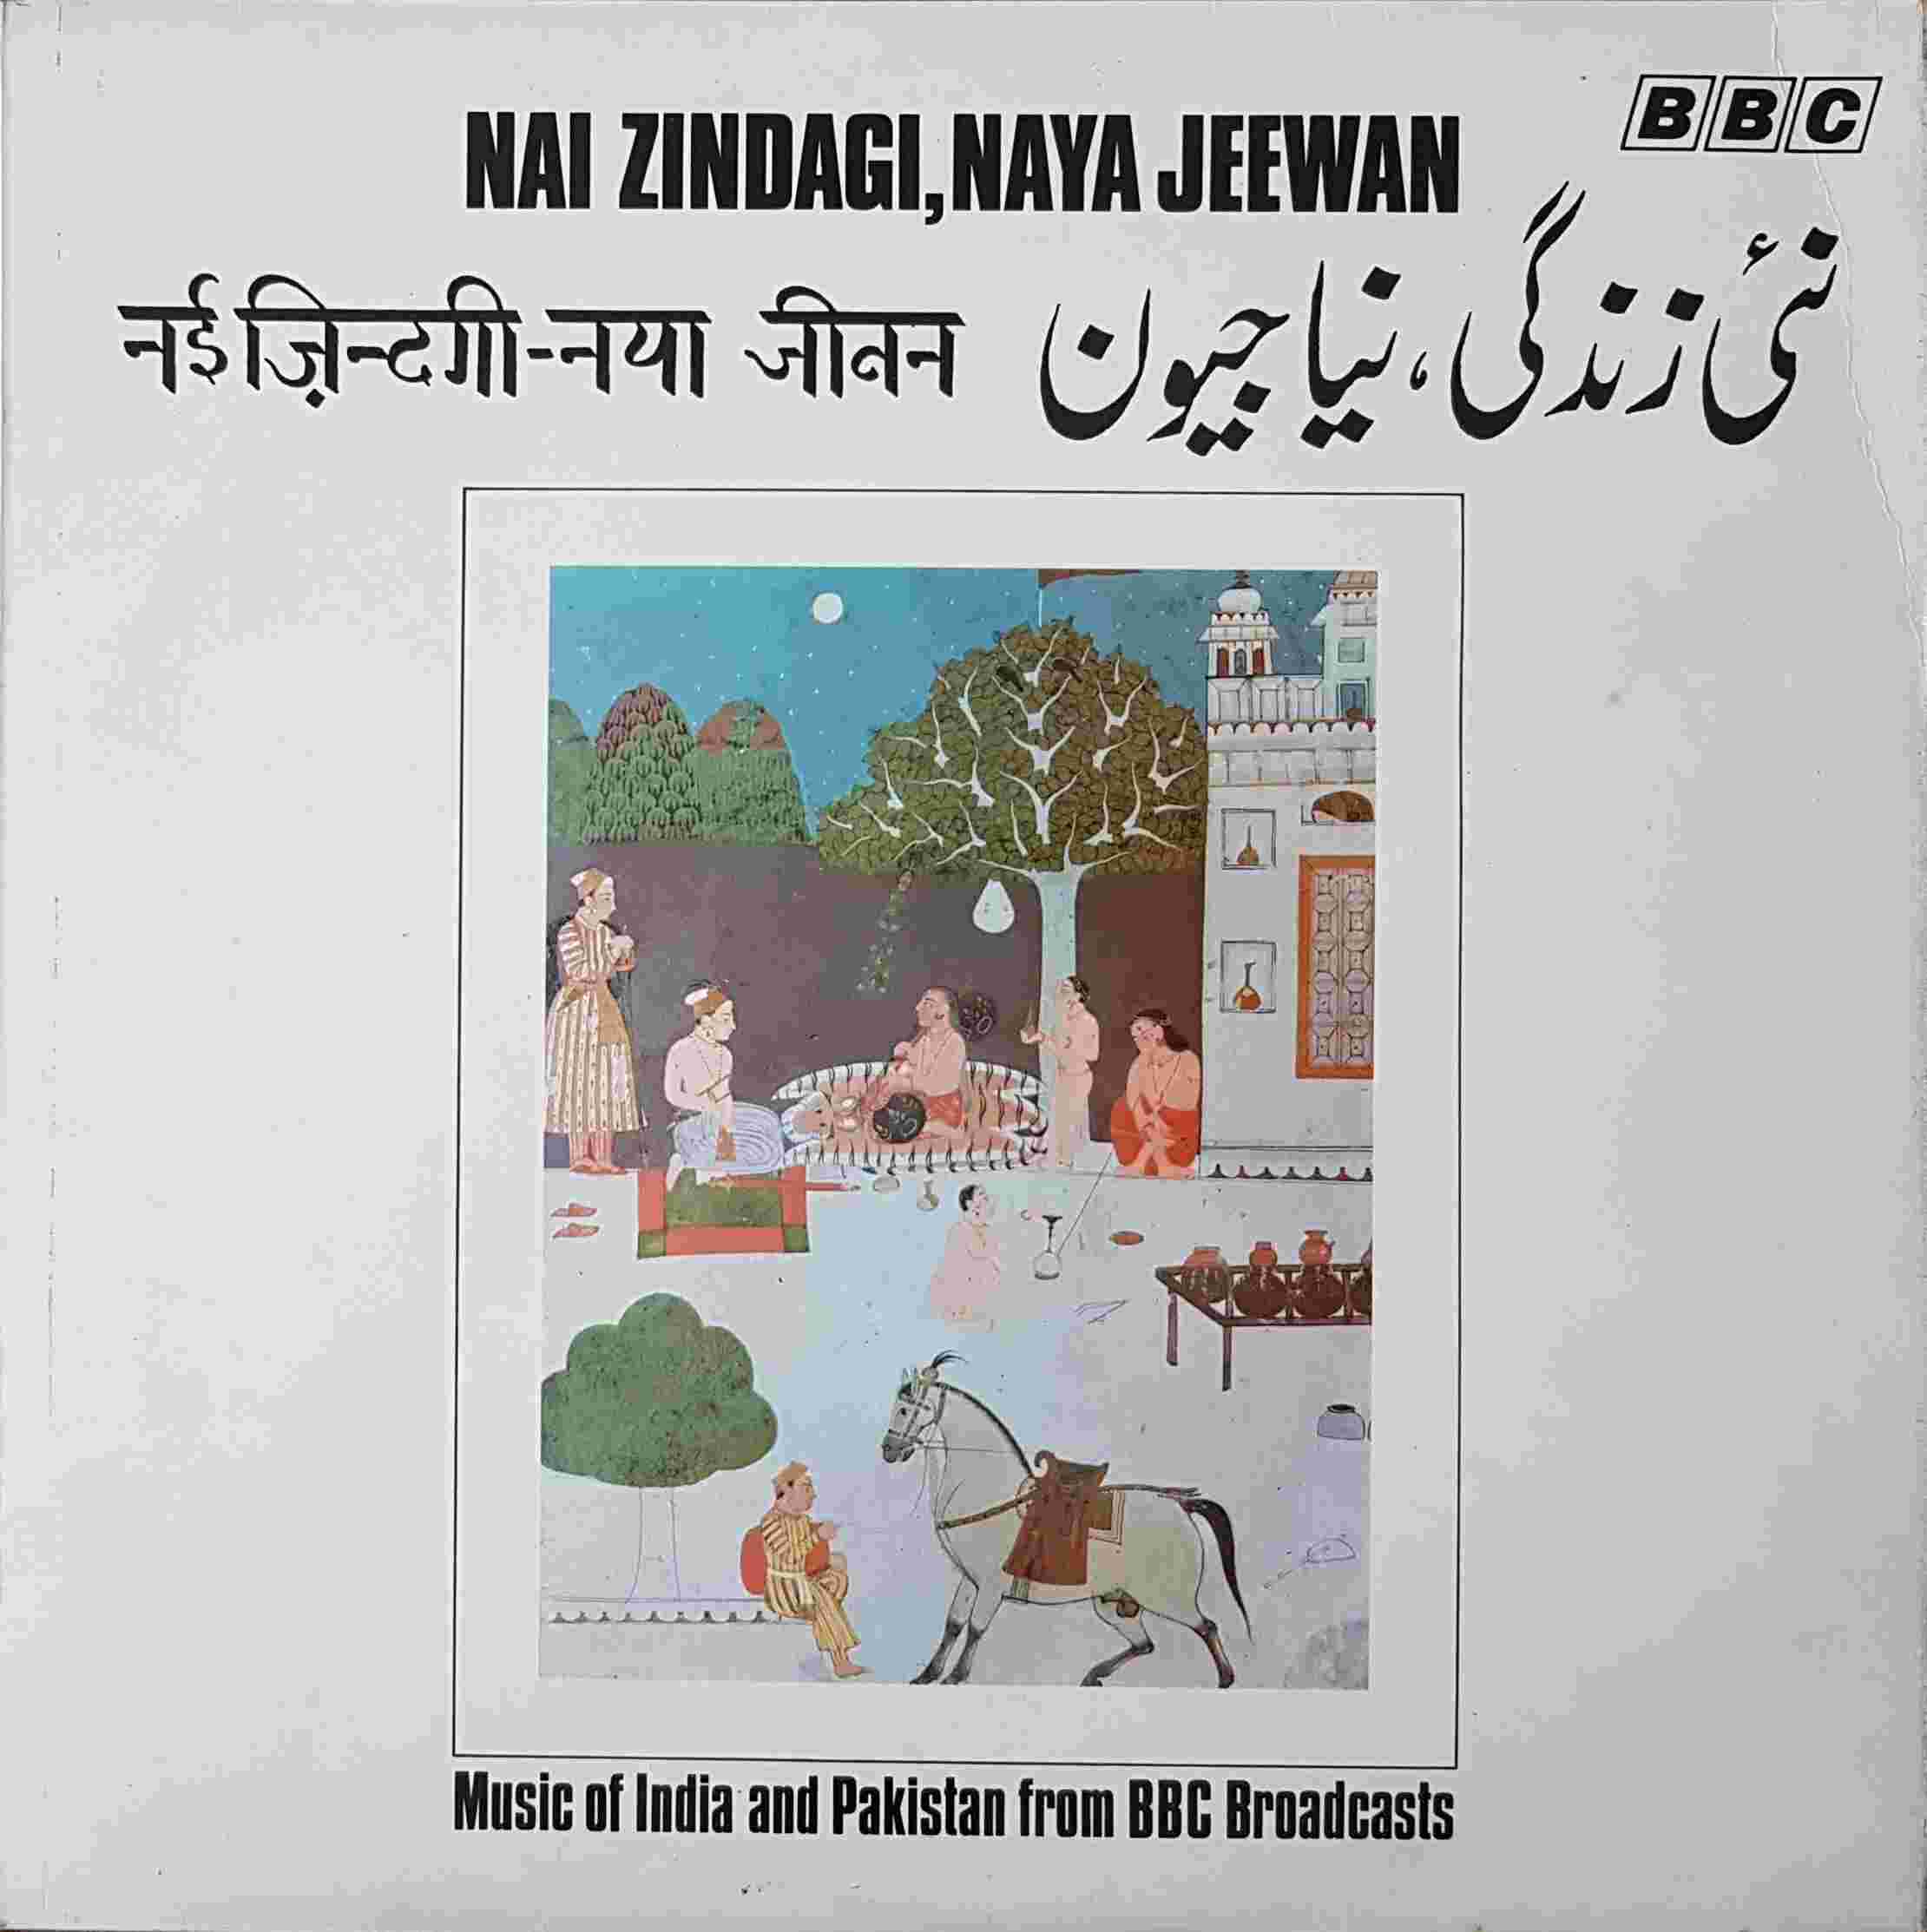 Picture of REC 50 Nai zindagi, naya jeevan - Music of India and Pakistan from BBC broadcasts by artist Various from the BBC albums - Records and Tapes library